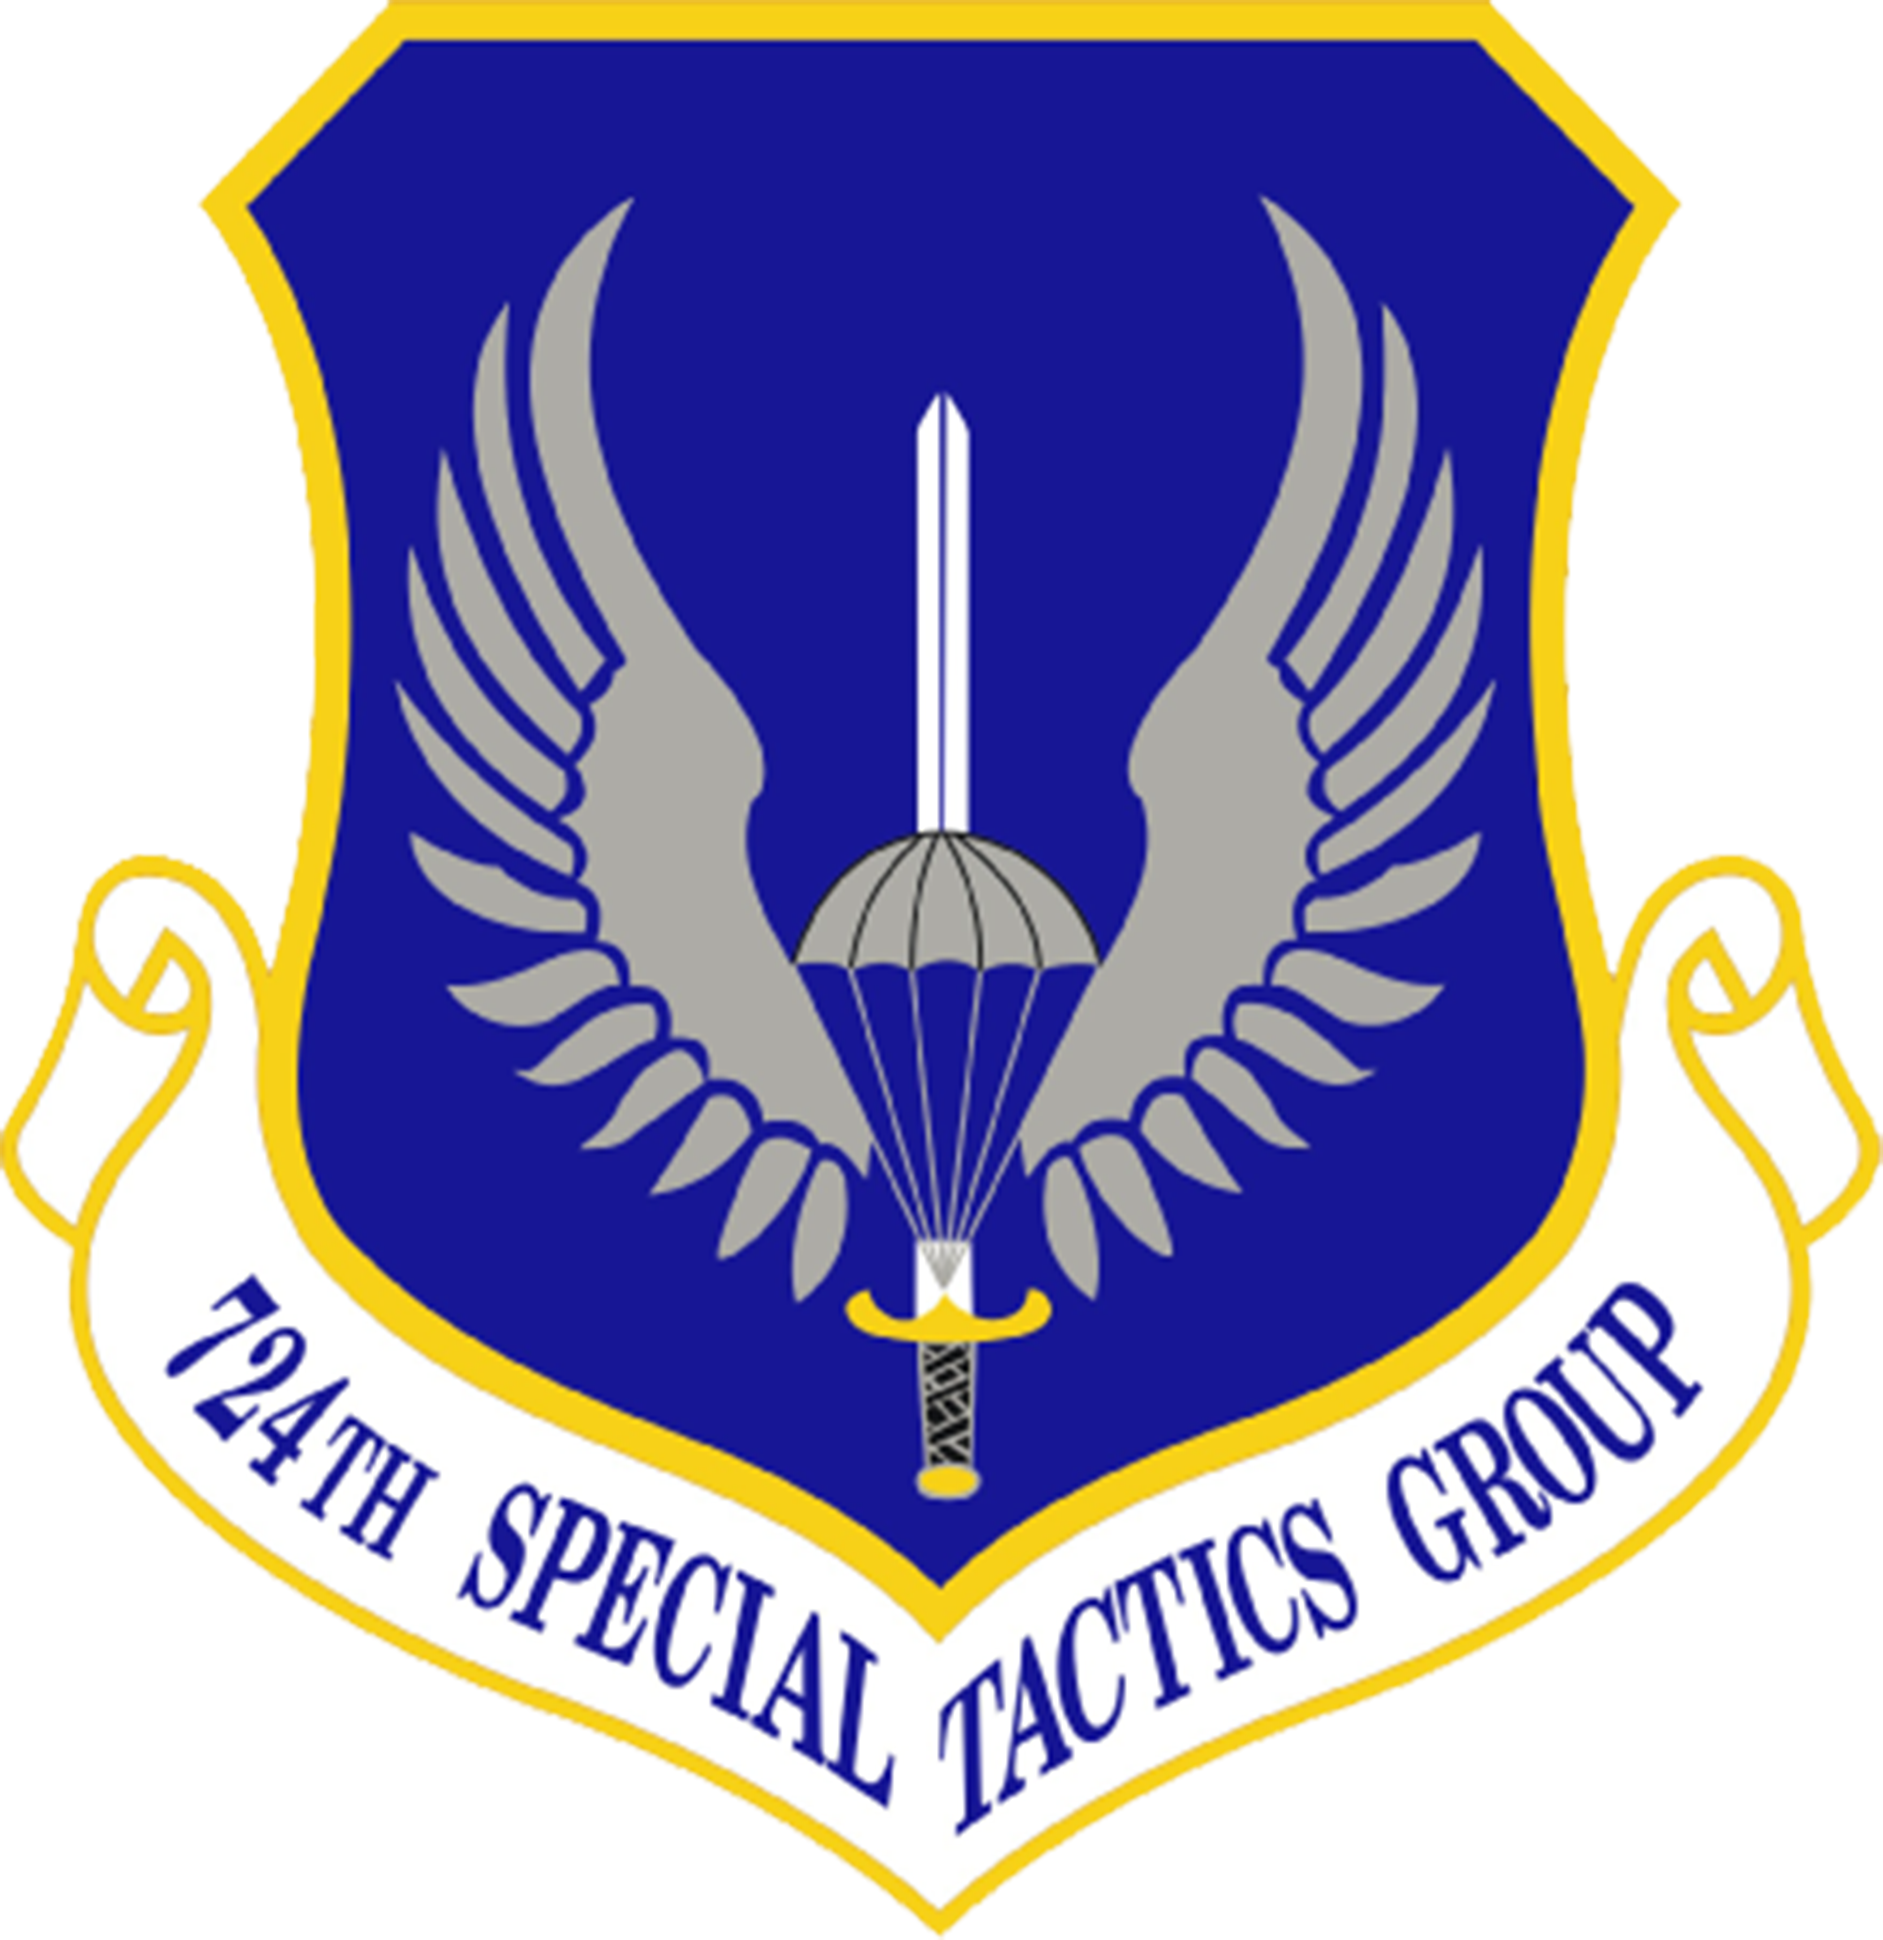 724th Special Tactics Group